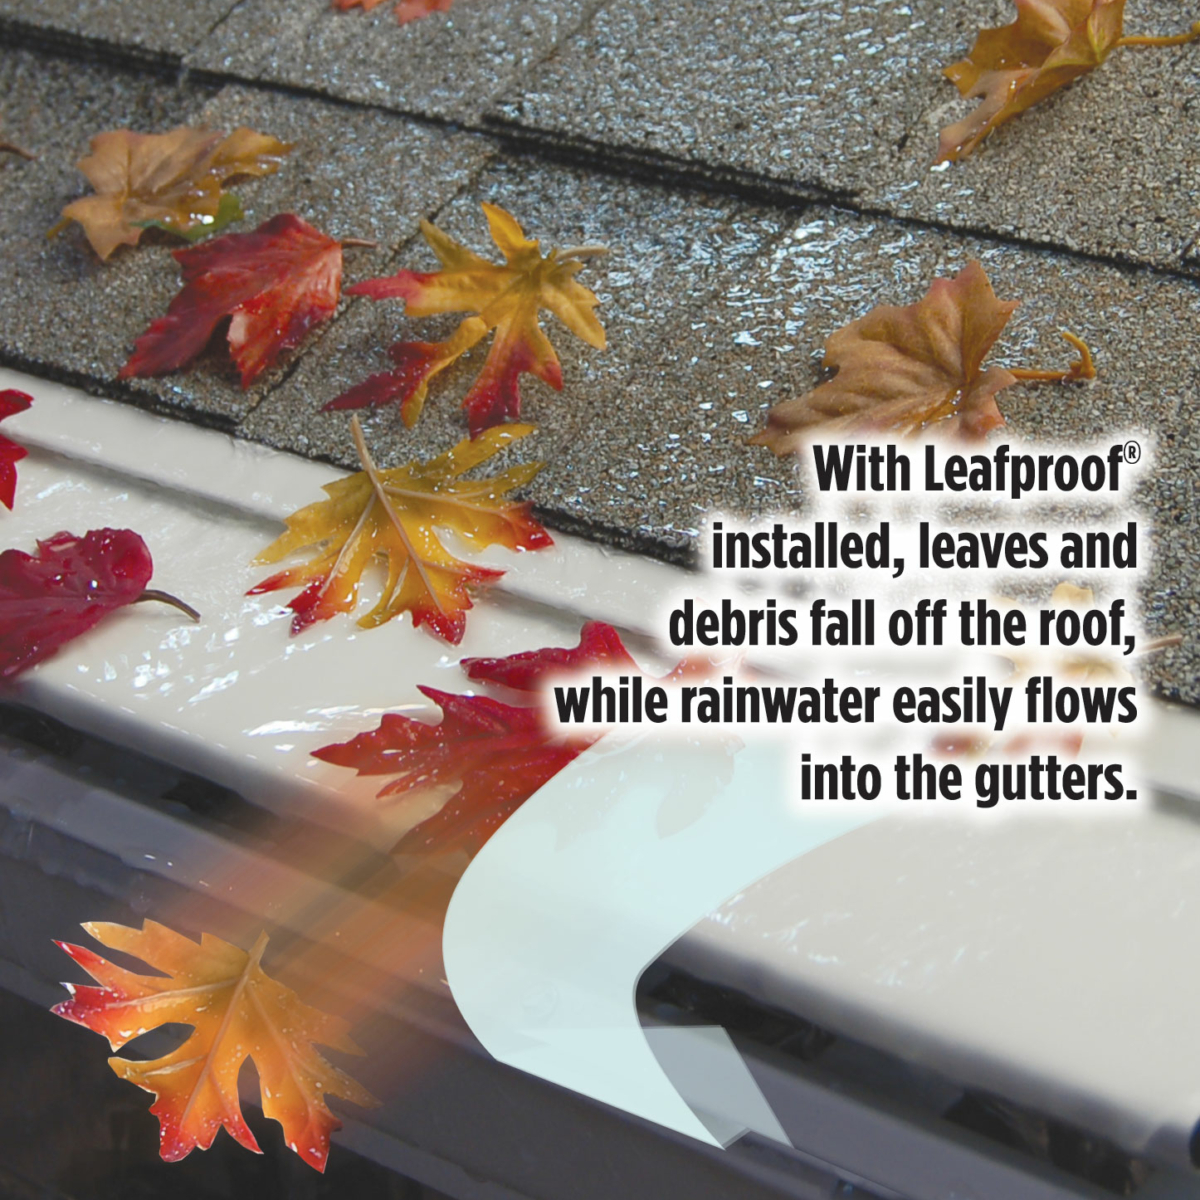 Leafproof Gutter Protection.